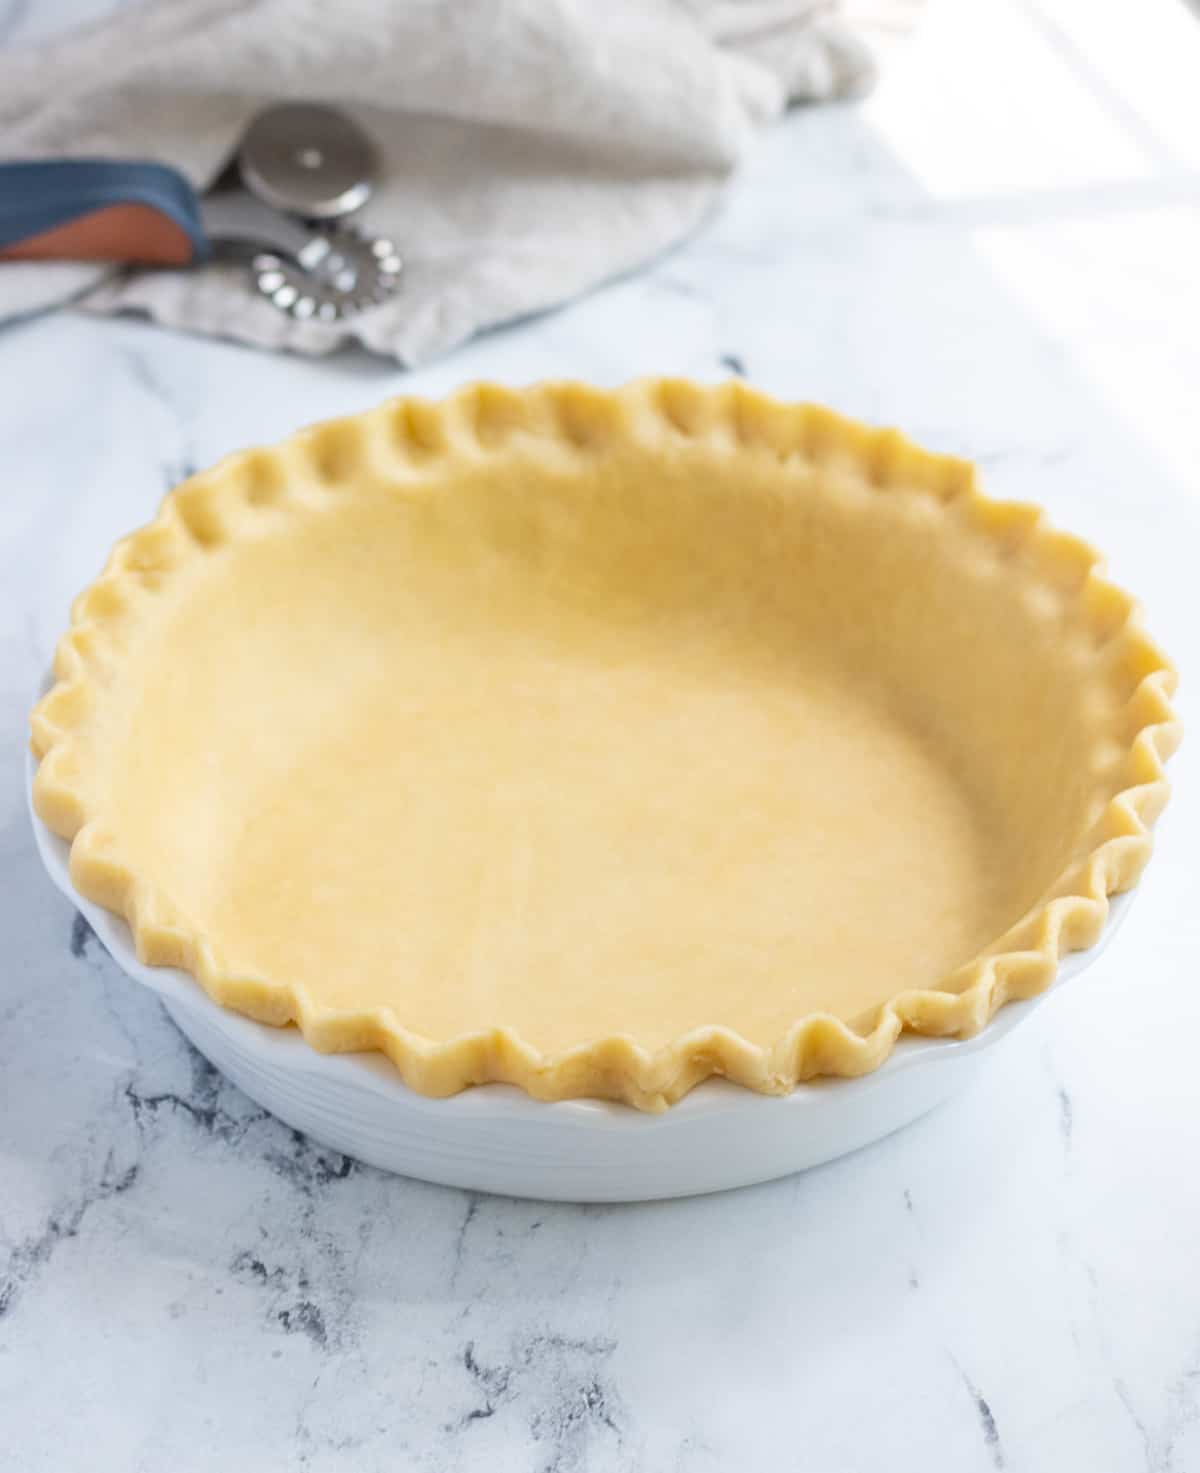 Unbaked pie crust with crimped edges in a pie plate.